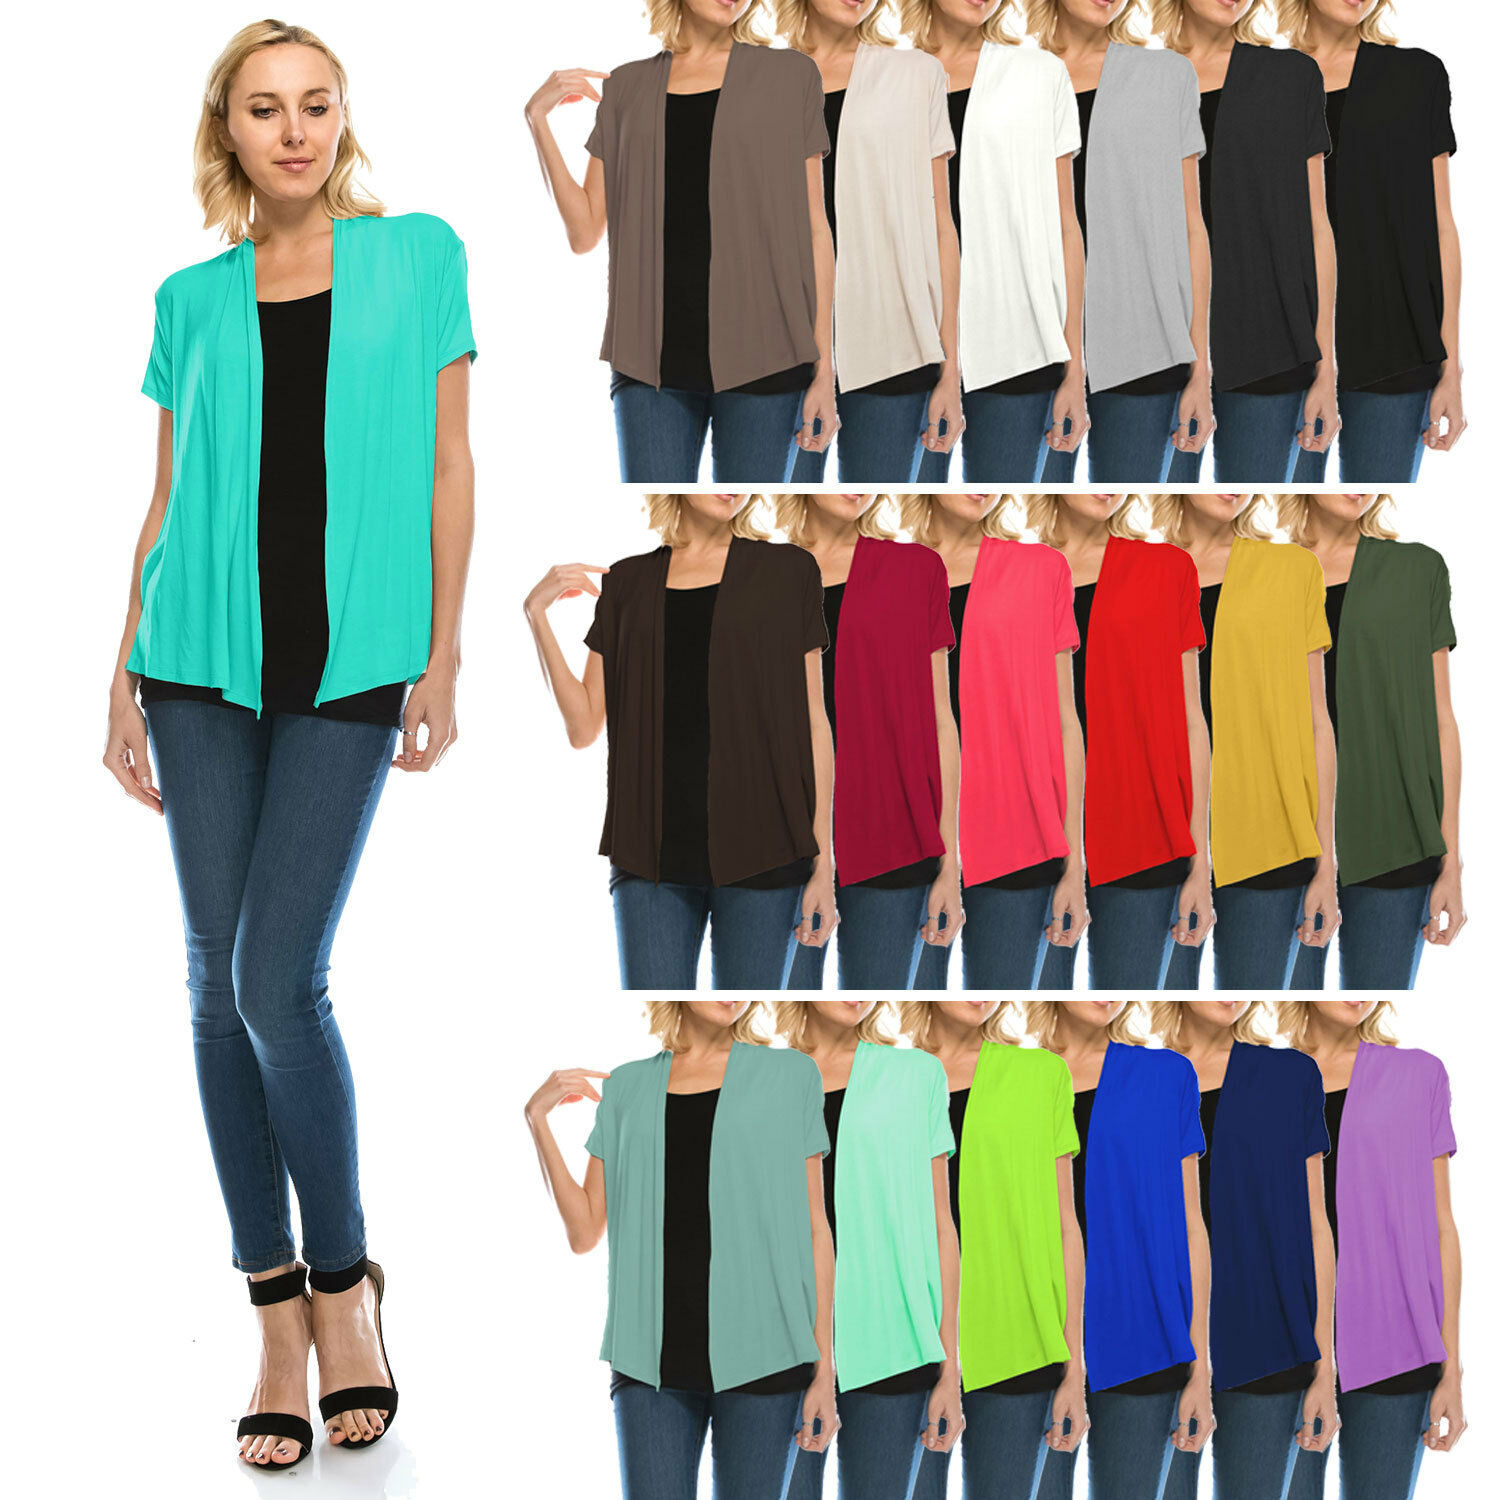 Jdstyle Women's Basic Short Sleeve Open Front Cardigan(size:s-5x)usa - At1188